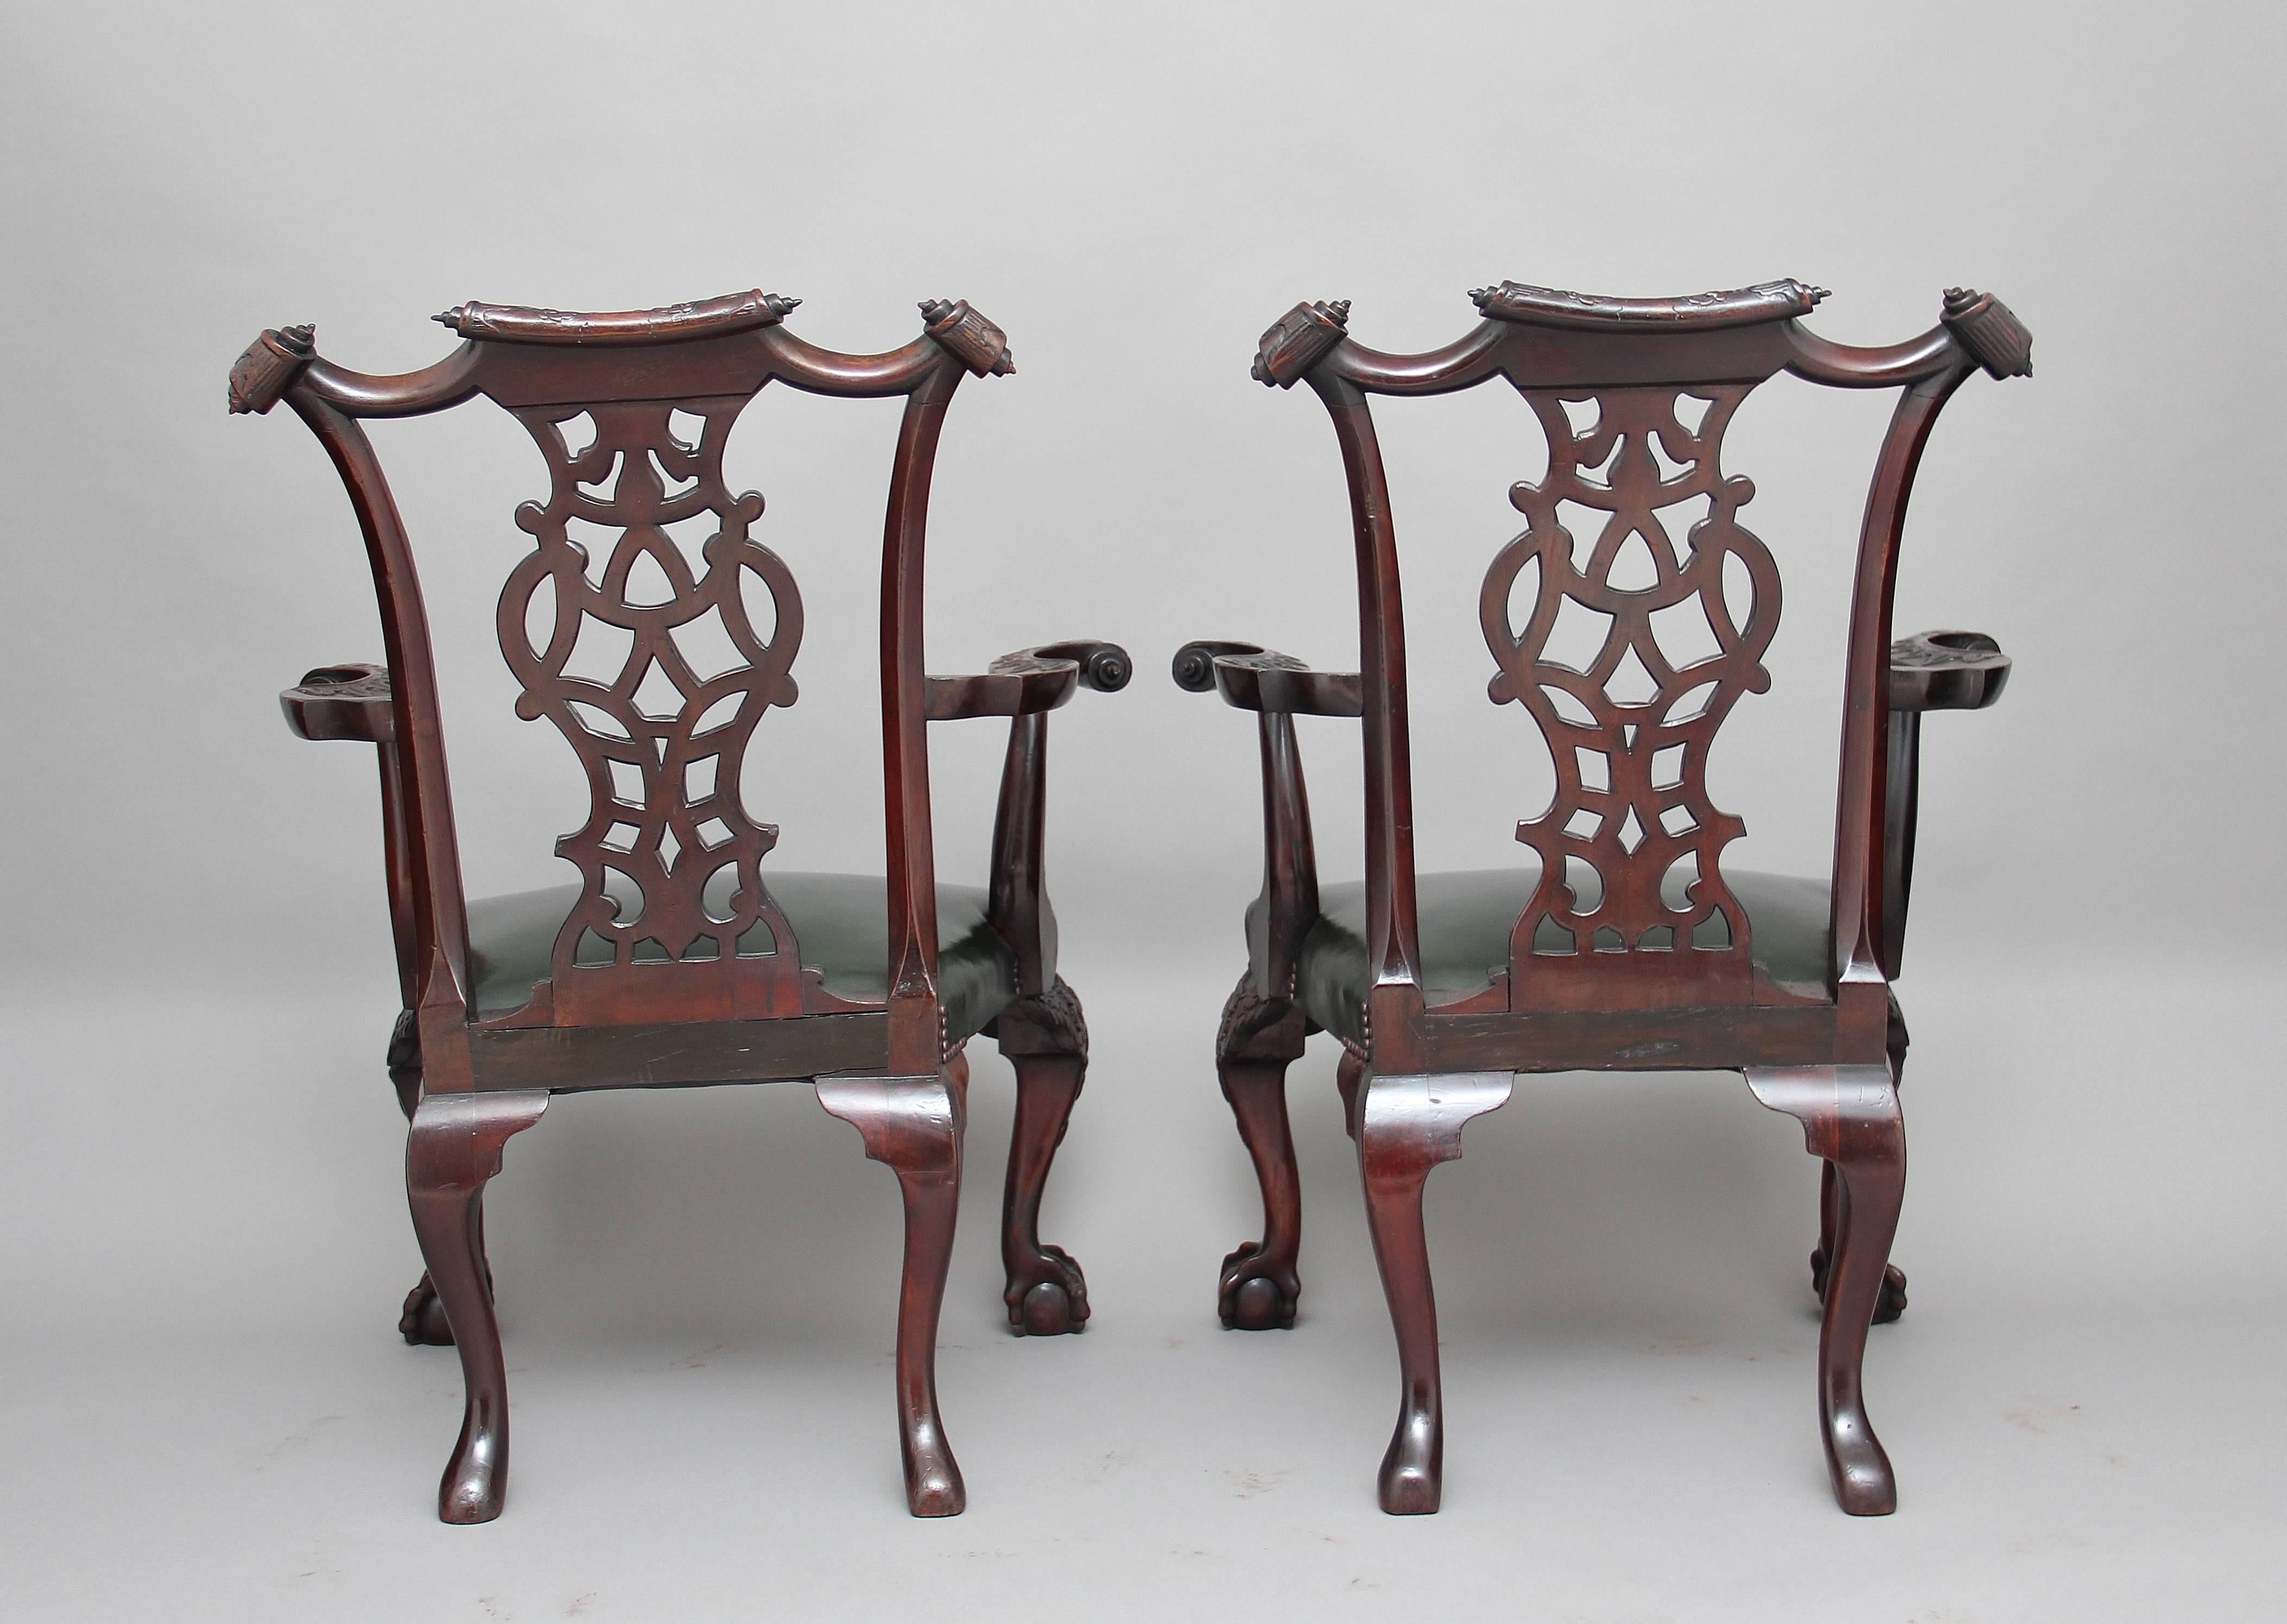 European Fine Pair of 19th Century Chippendale Revival Mahogany Armchairs